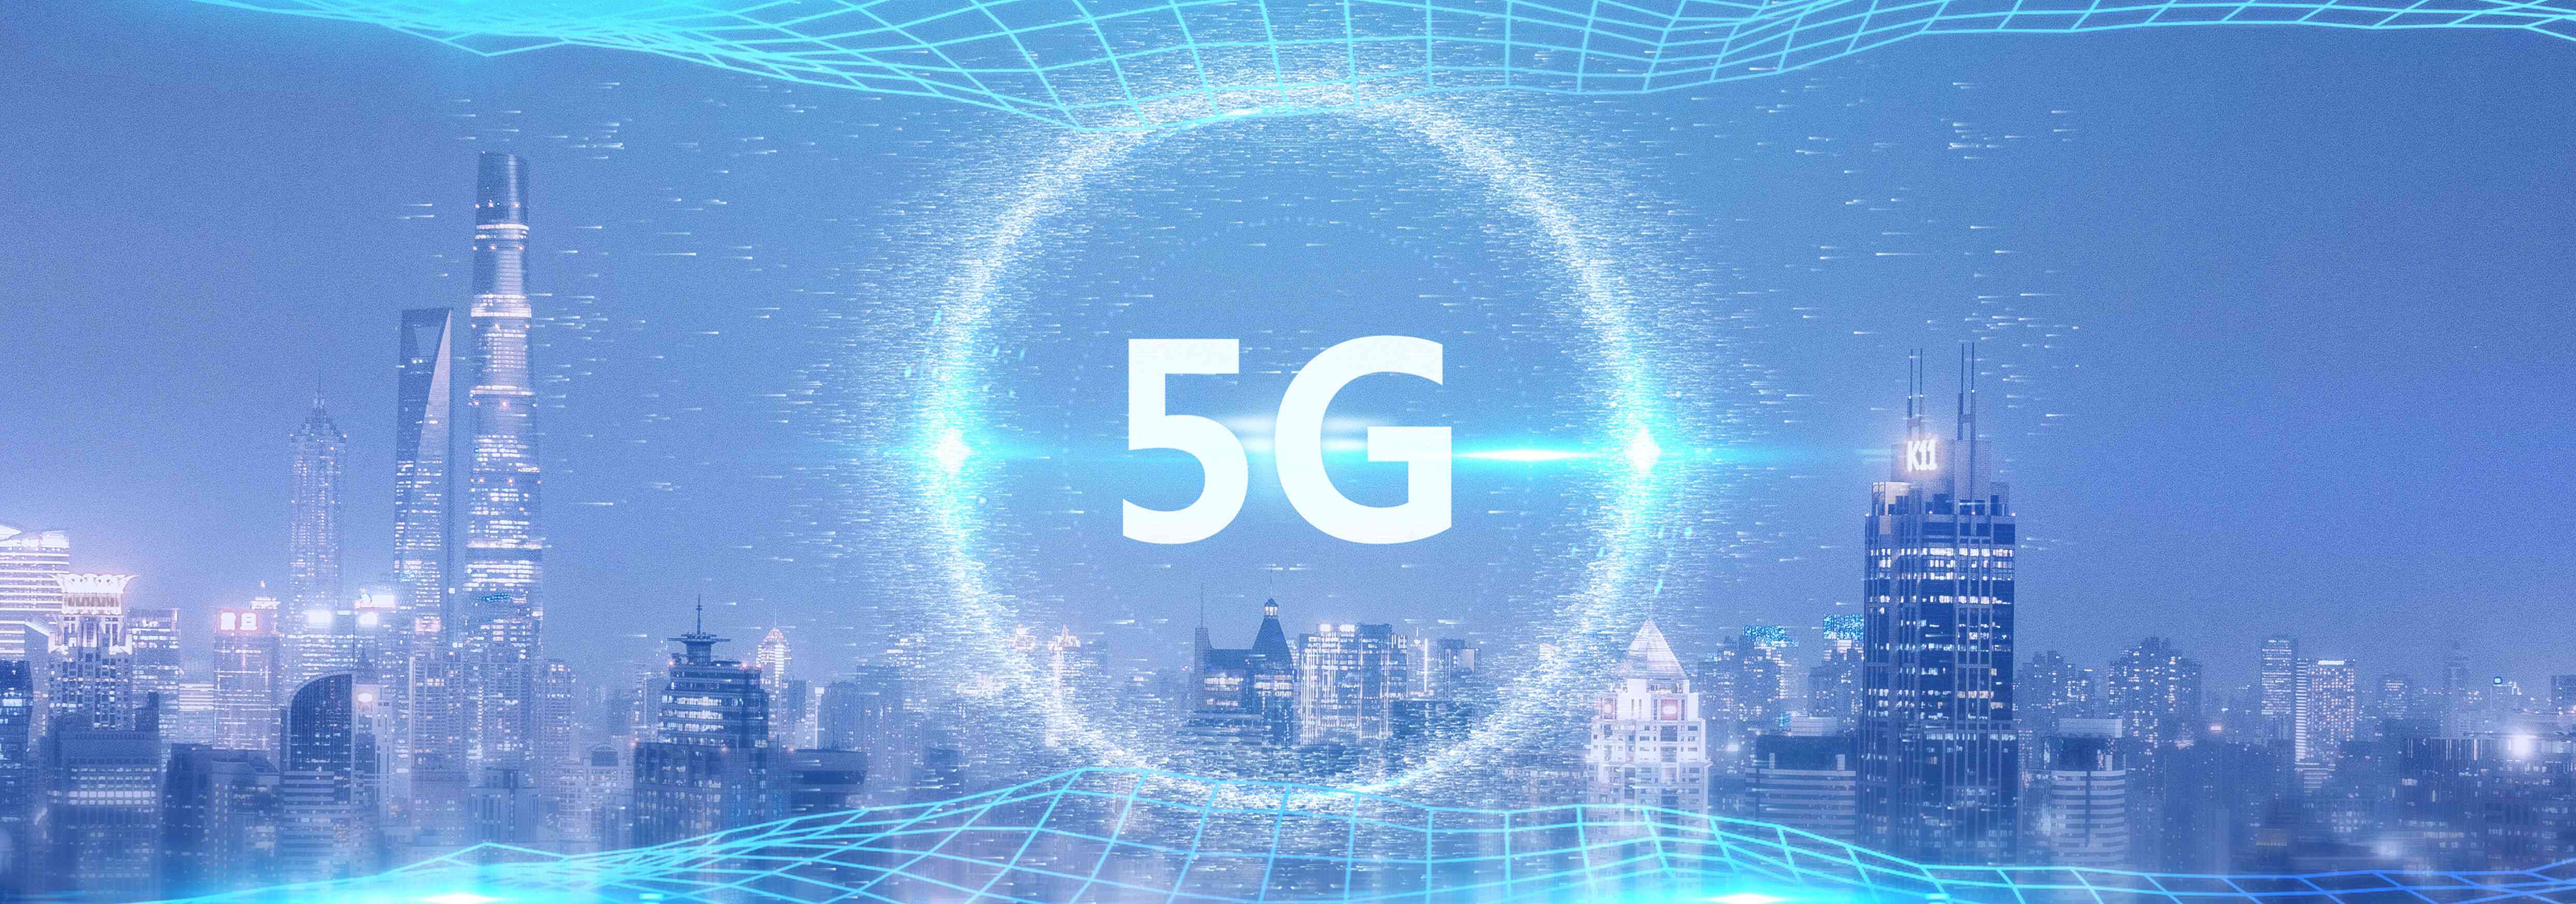 The term “5G” encircled and superimposed over a city backdrop with wavy lines